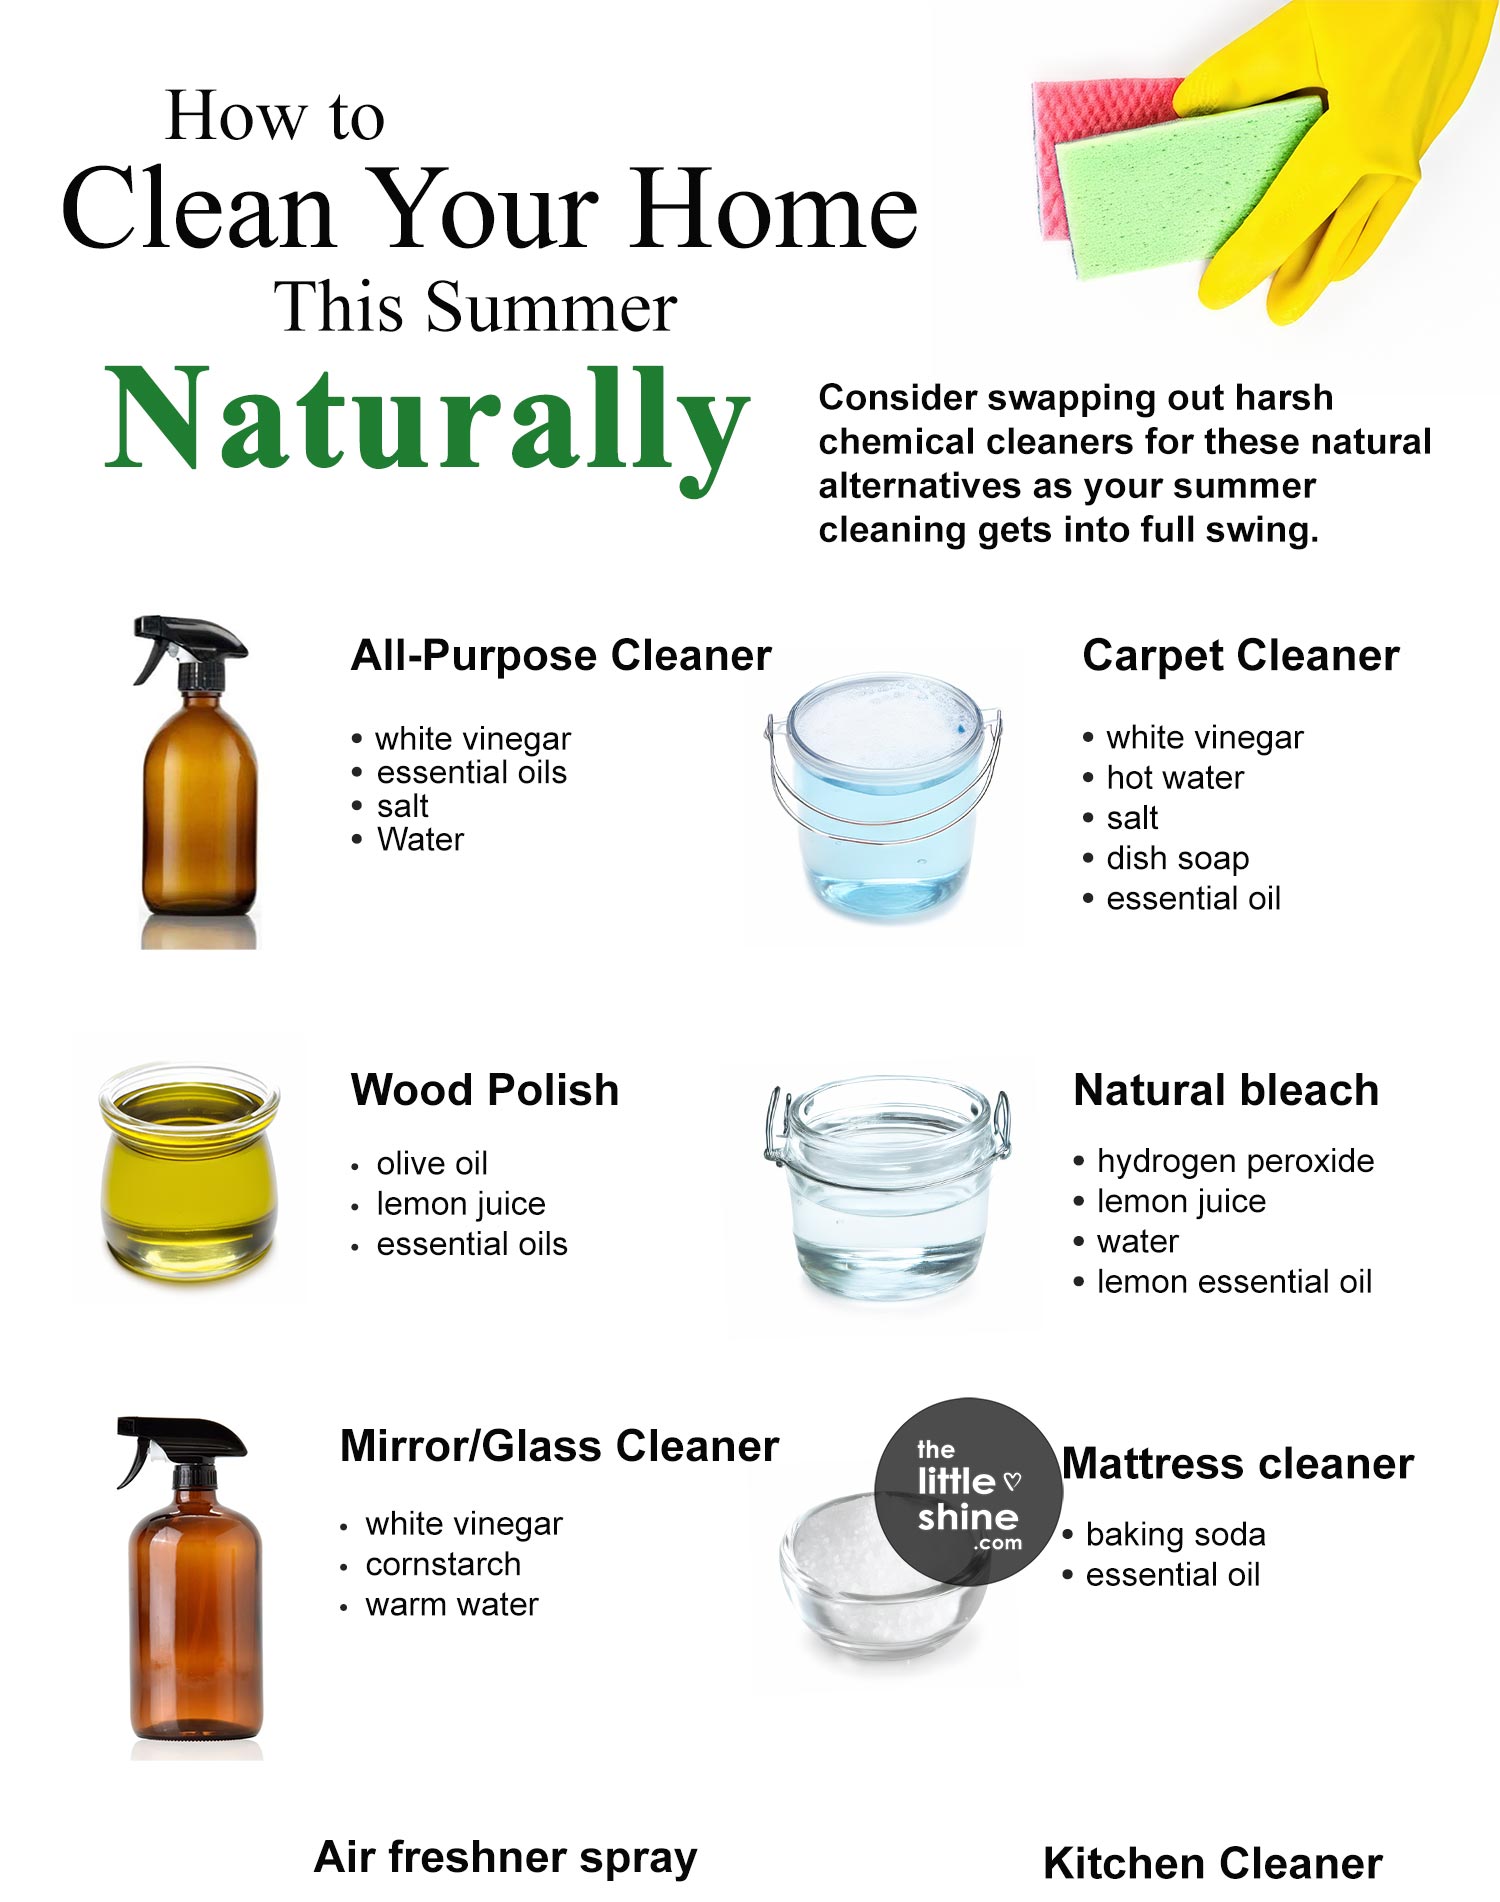 How to Clean Your Home This Summer - Naturally!